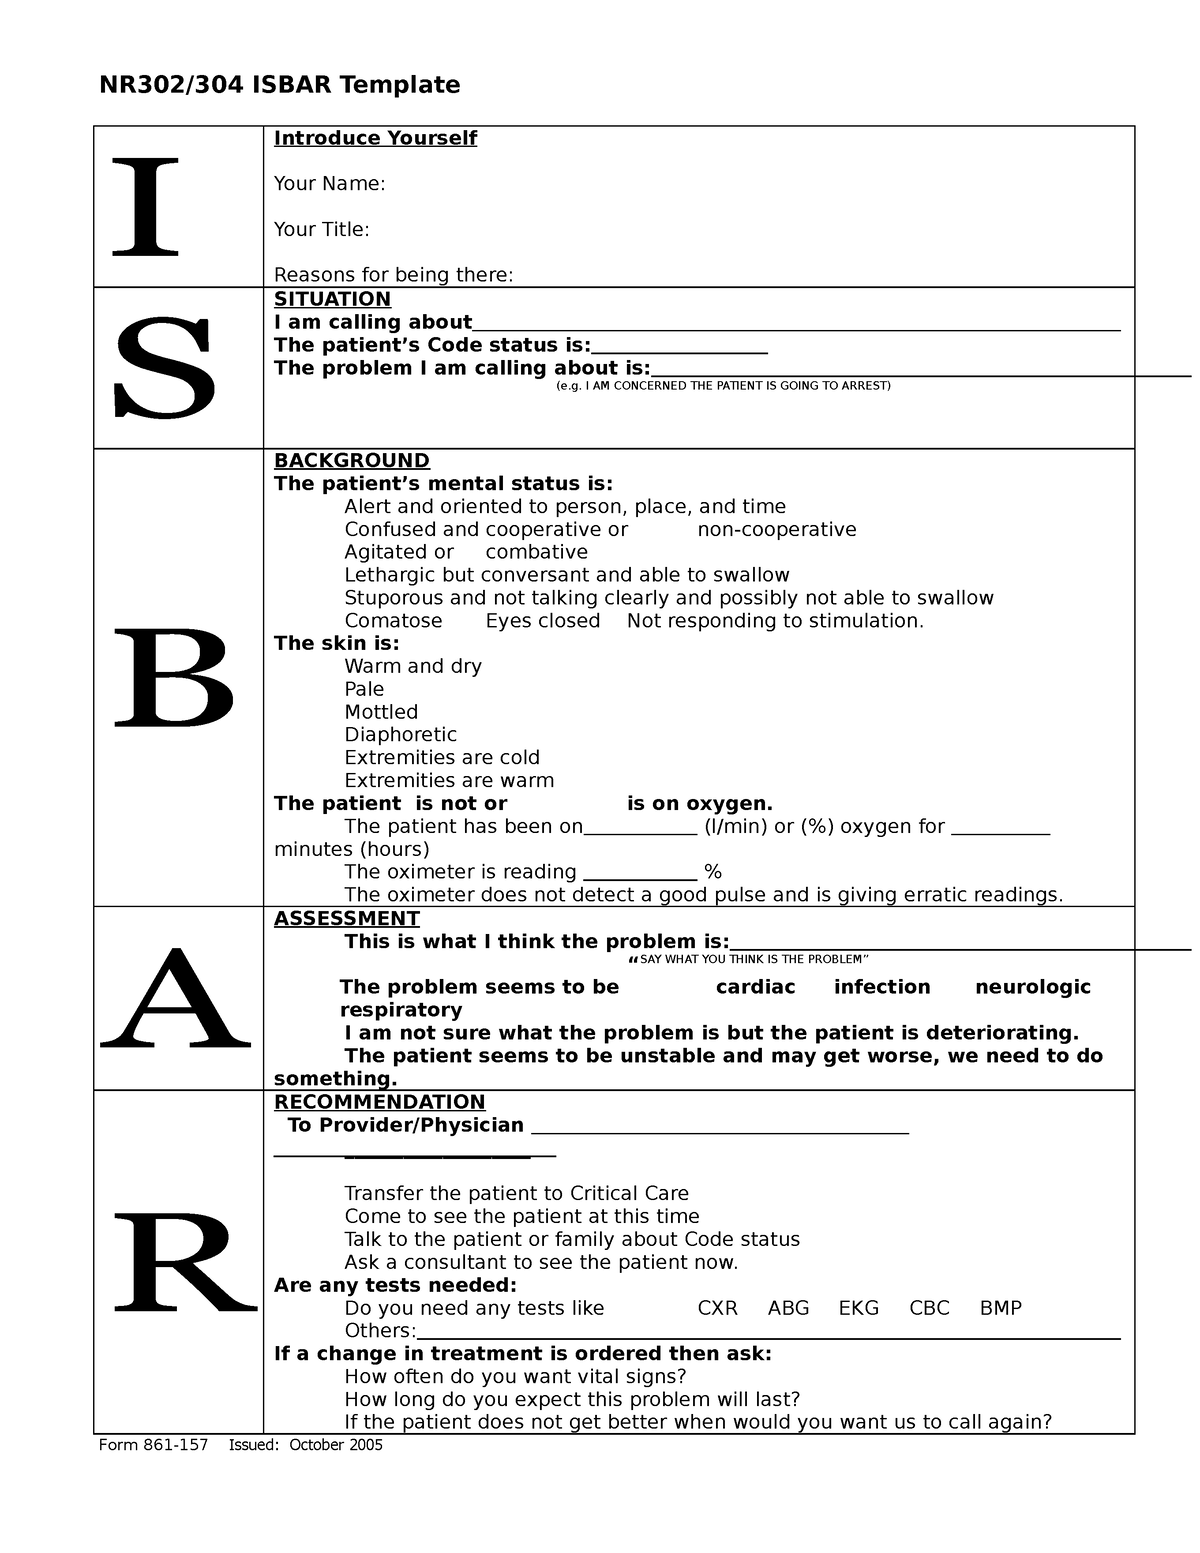 Isbar with Guidelines - NR302/304 ISBAR Template I Introduce Yourself ...